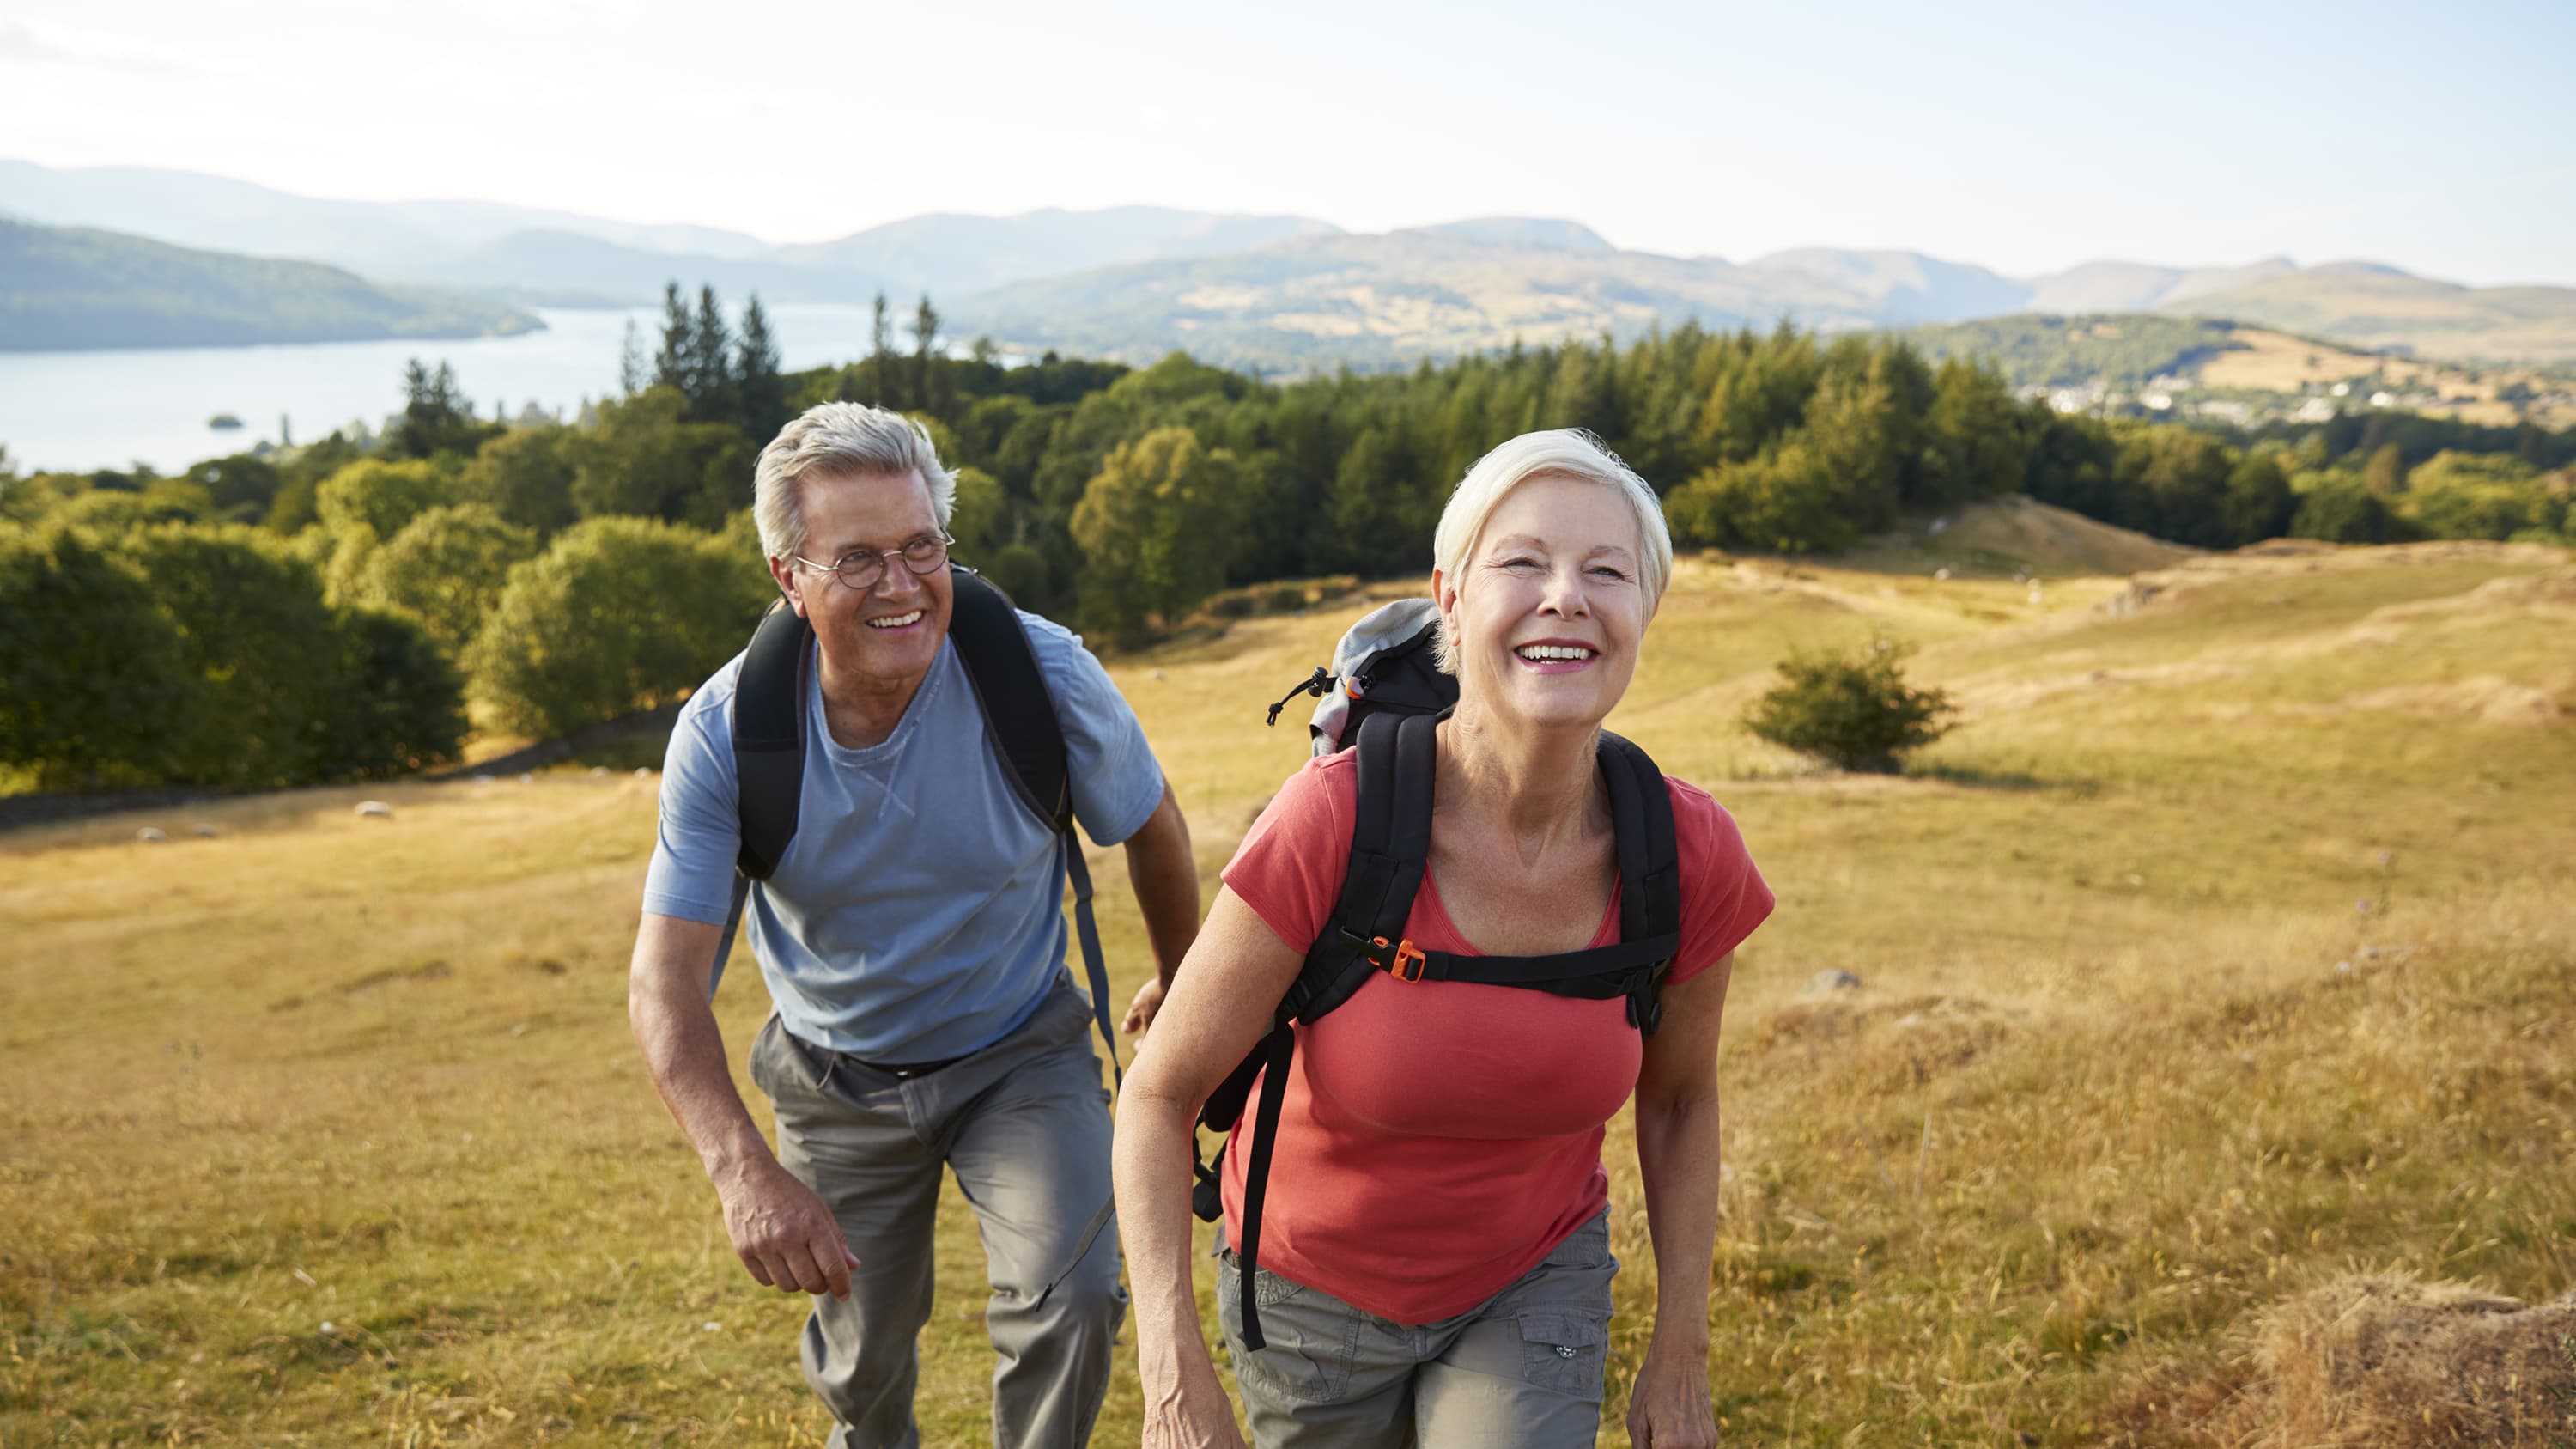 An older couple hiking after undergoing bicuspid aortic valve repair.